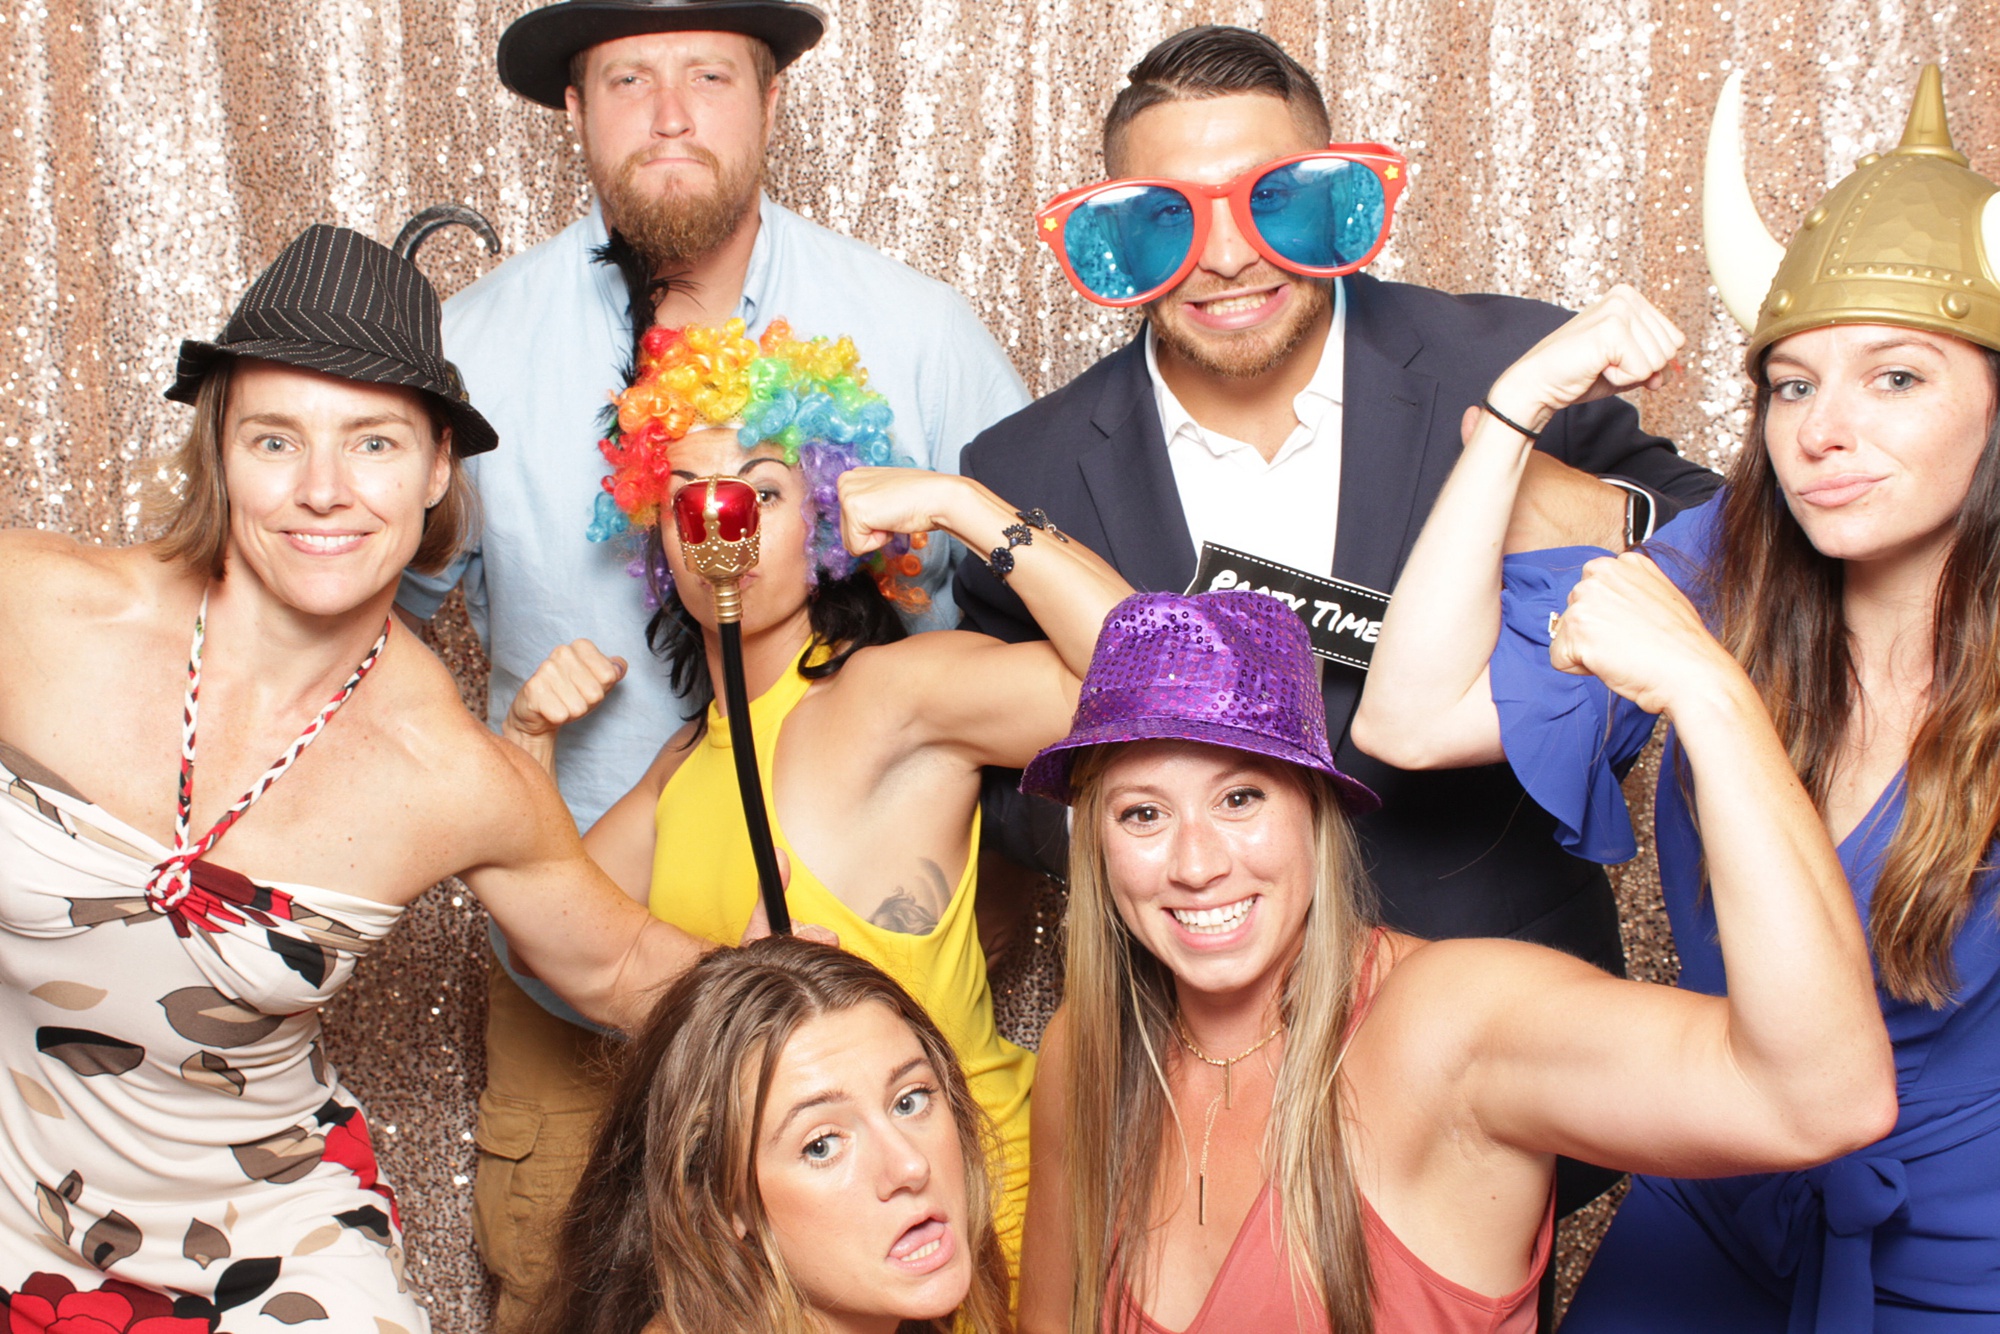 New Jersey photo booth fun at Brant Beach Yacht Club